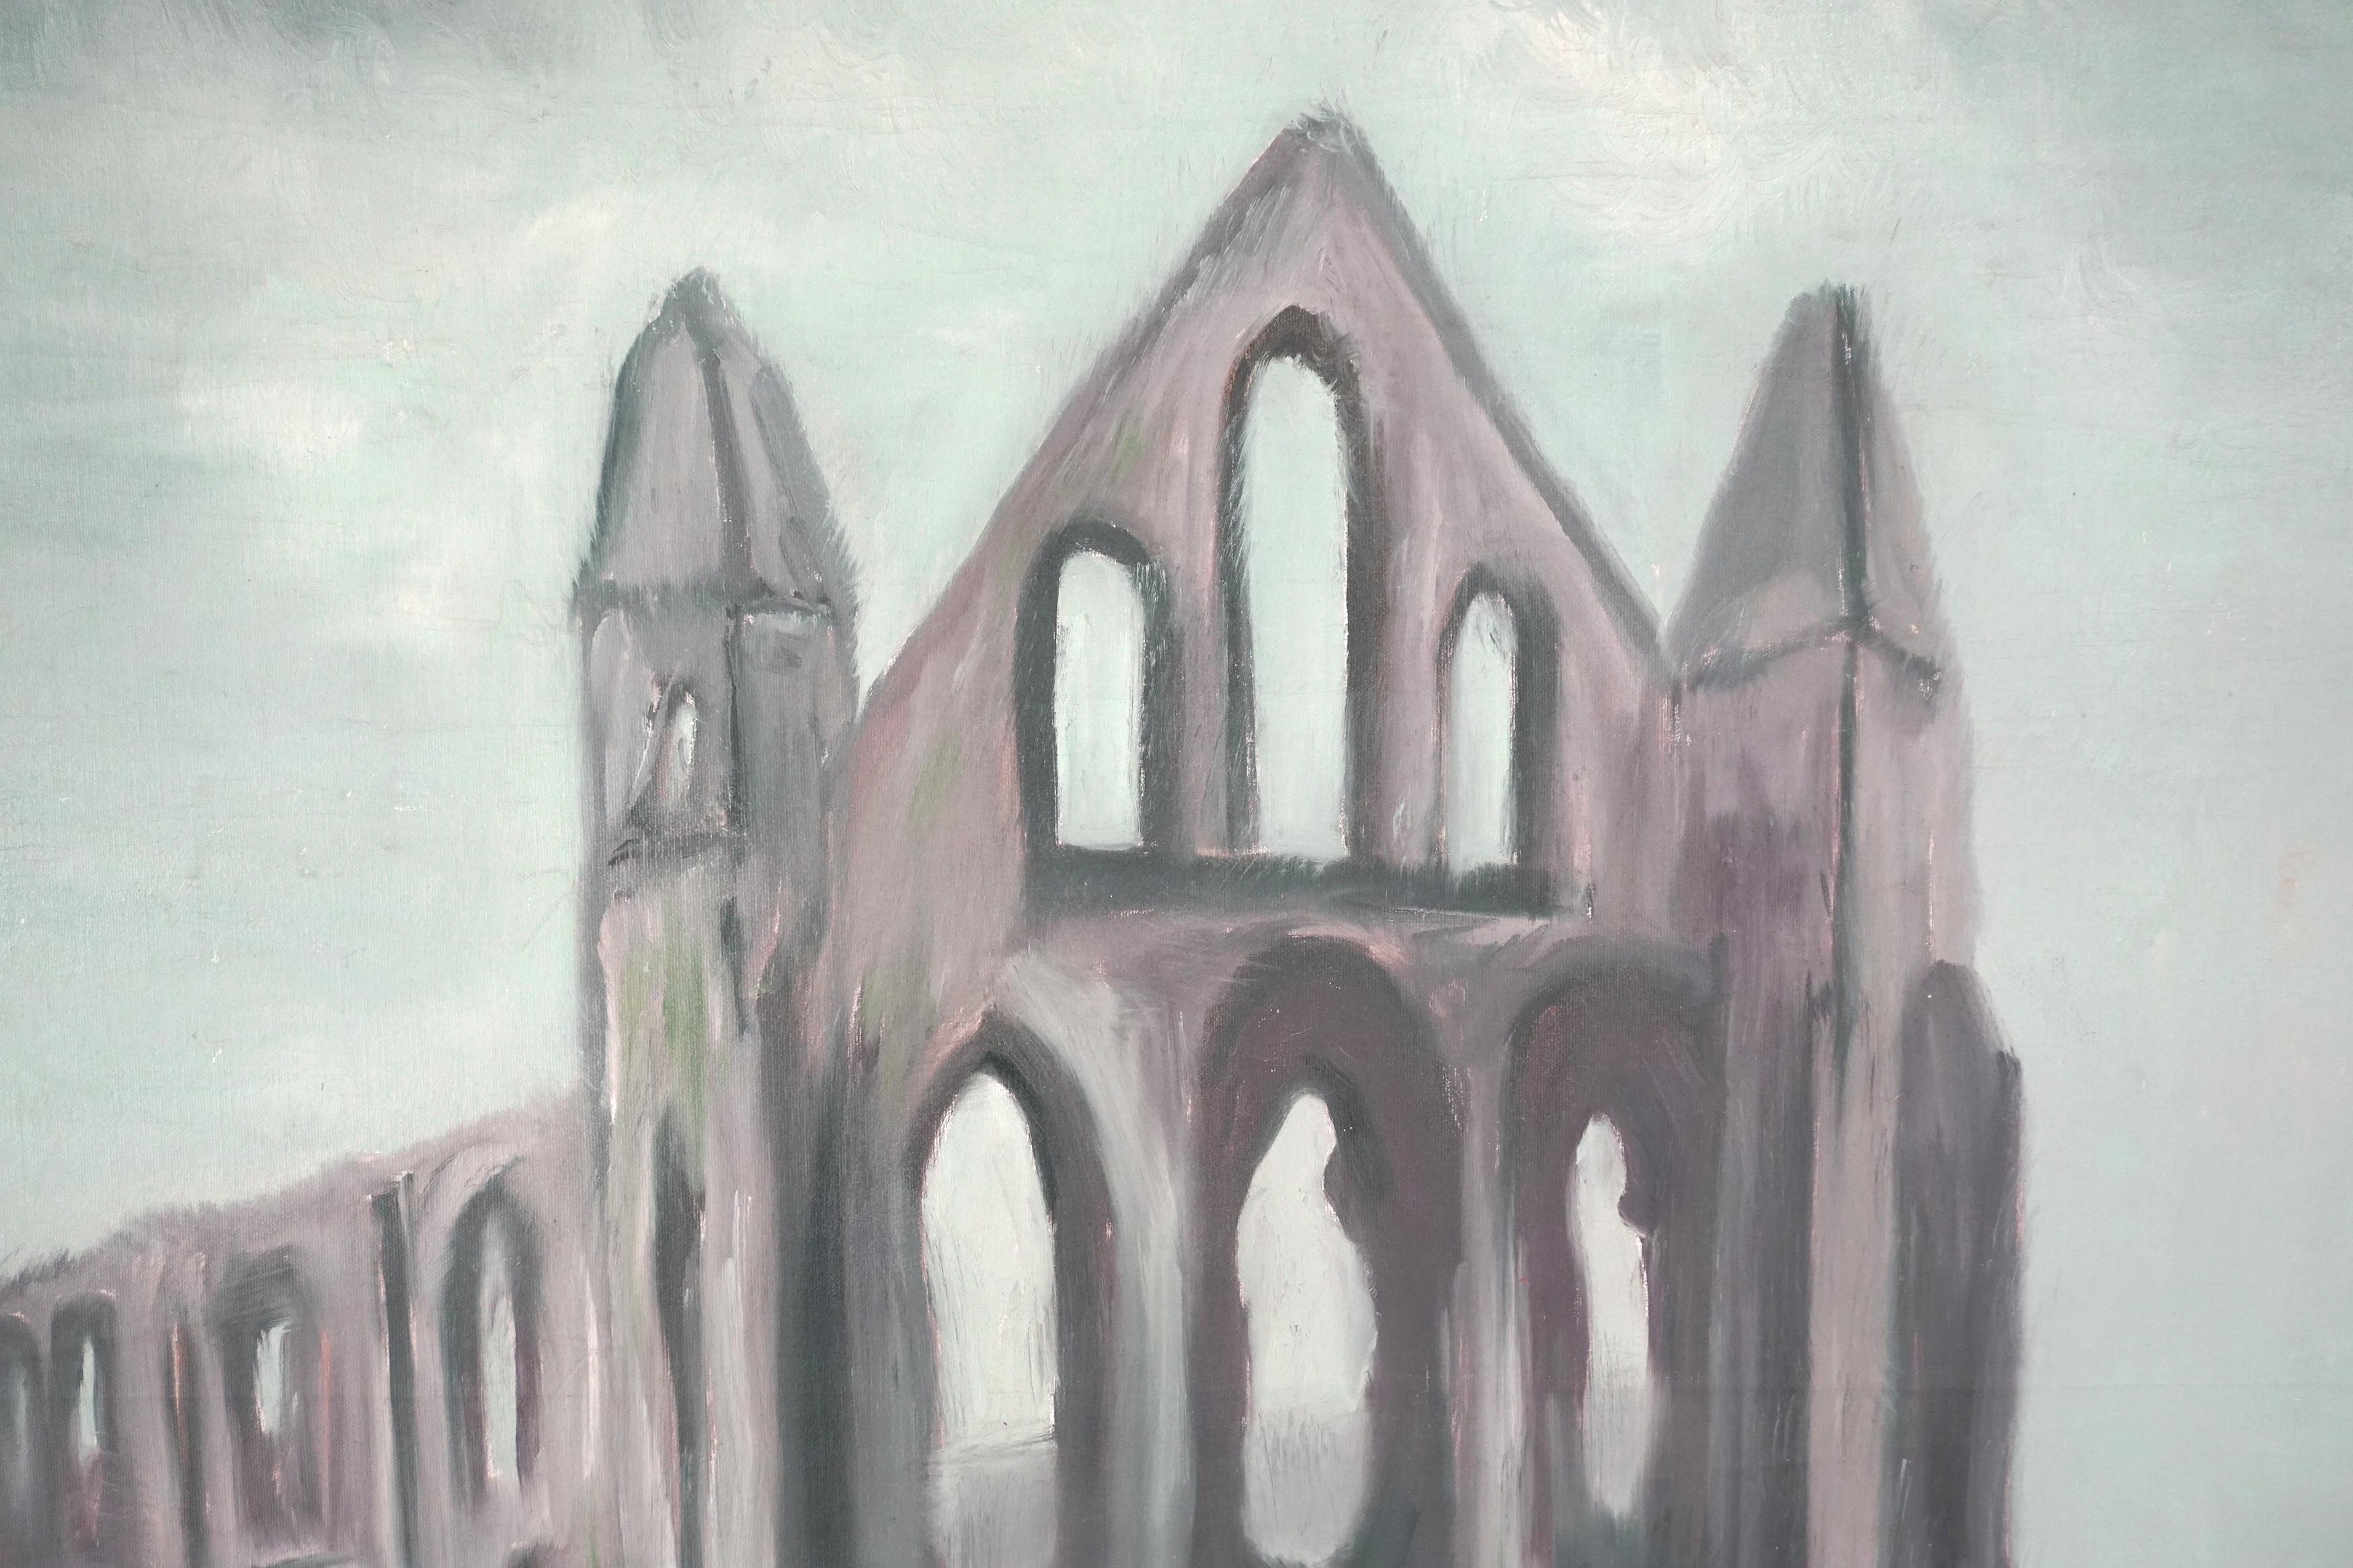 1940s Yorkshire, England Landscape of Whitby Abbey Ruins - Painting by Marguerite Blasingame